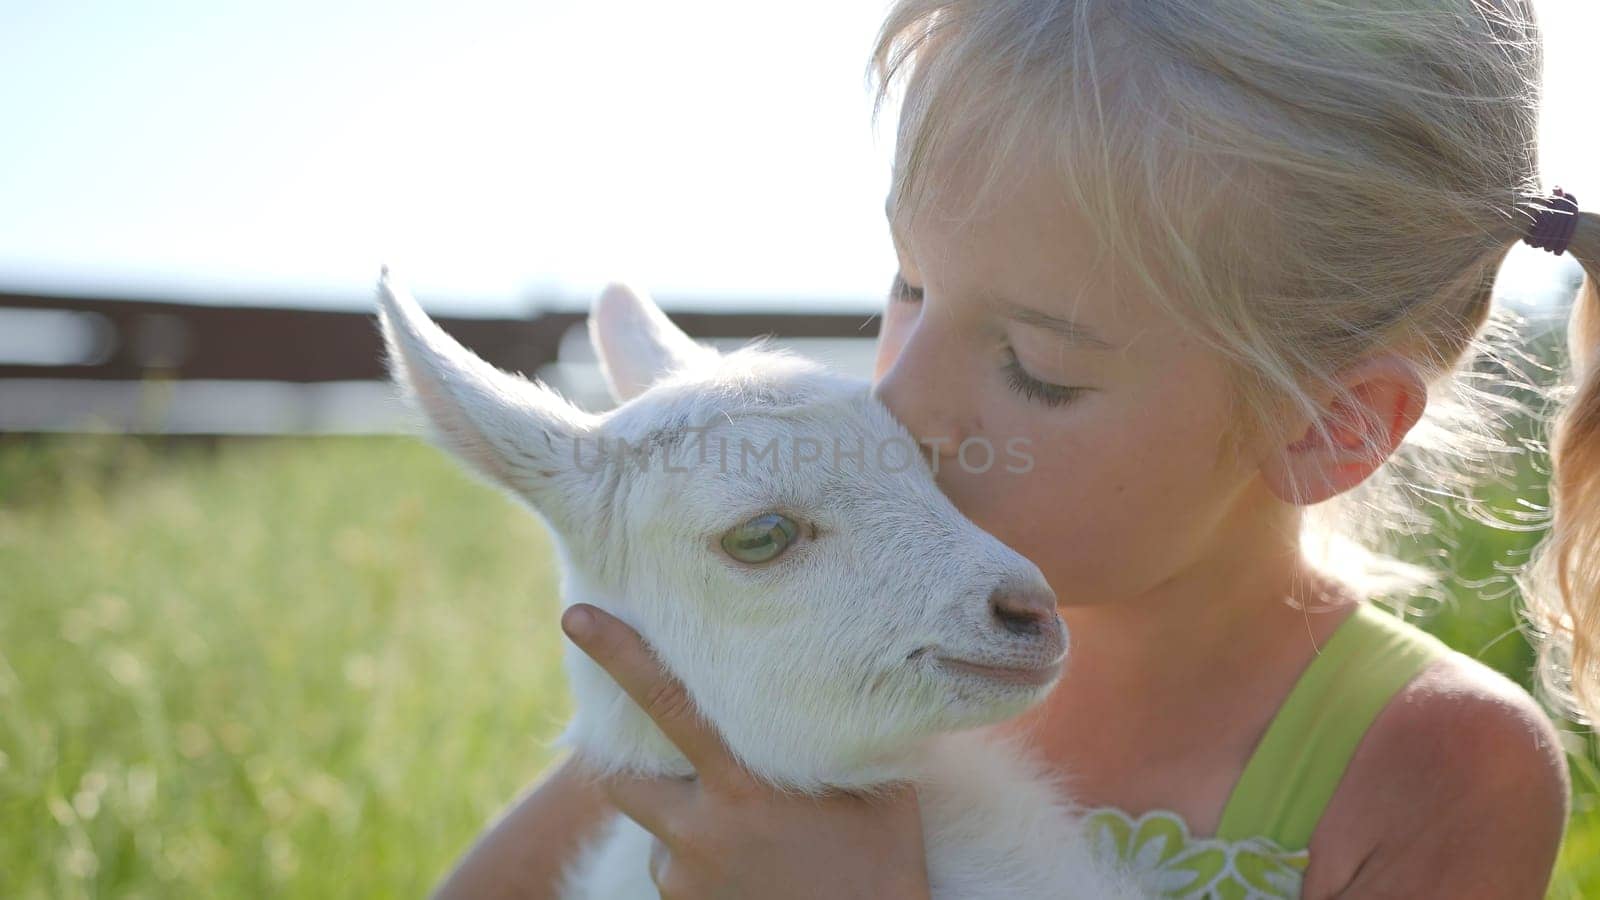 A six-year-old girl in a meadow gently hugs a small white goat